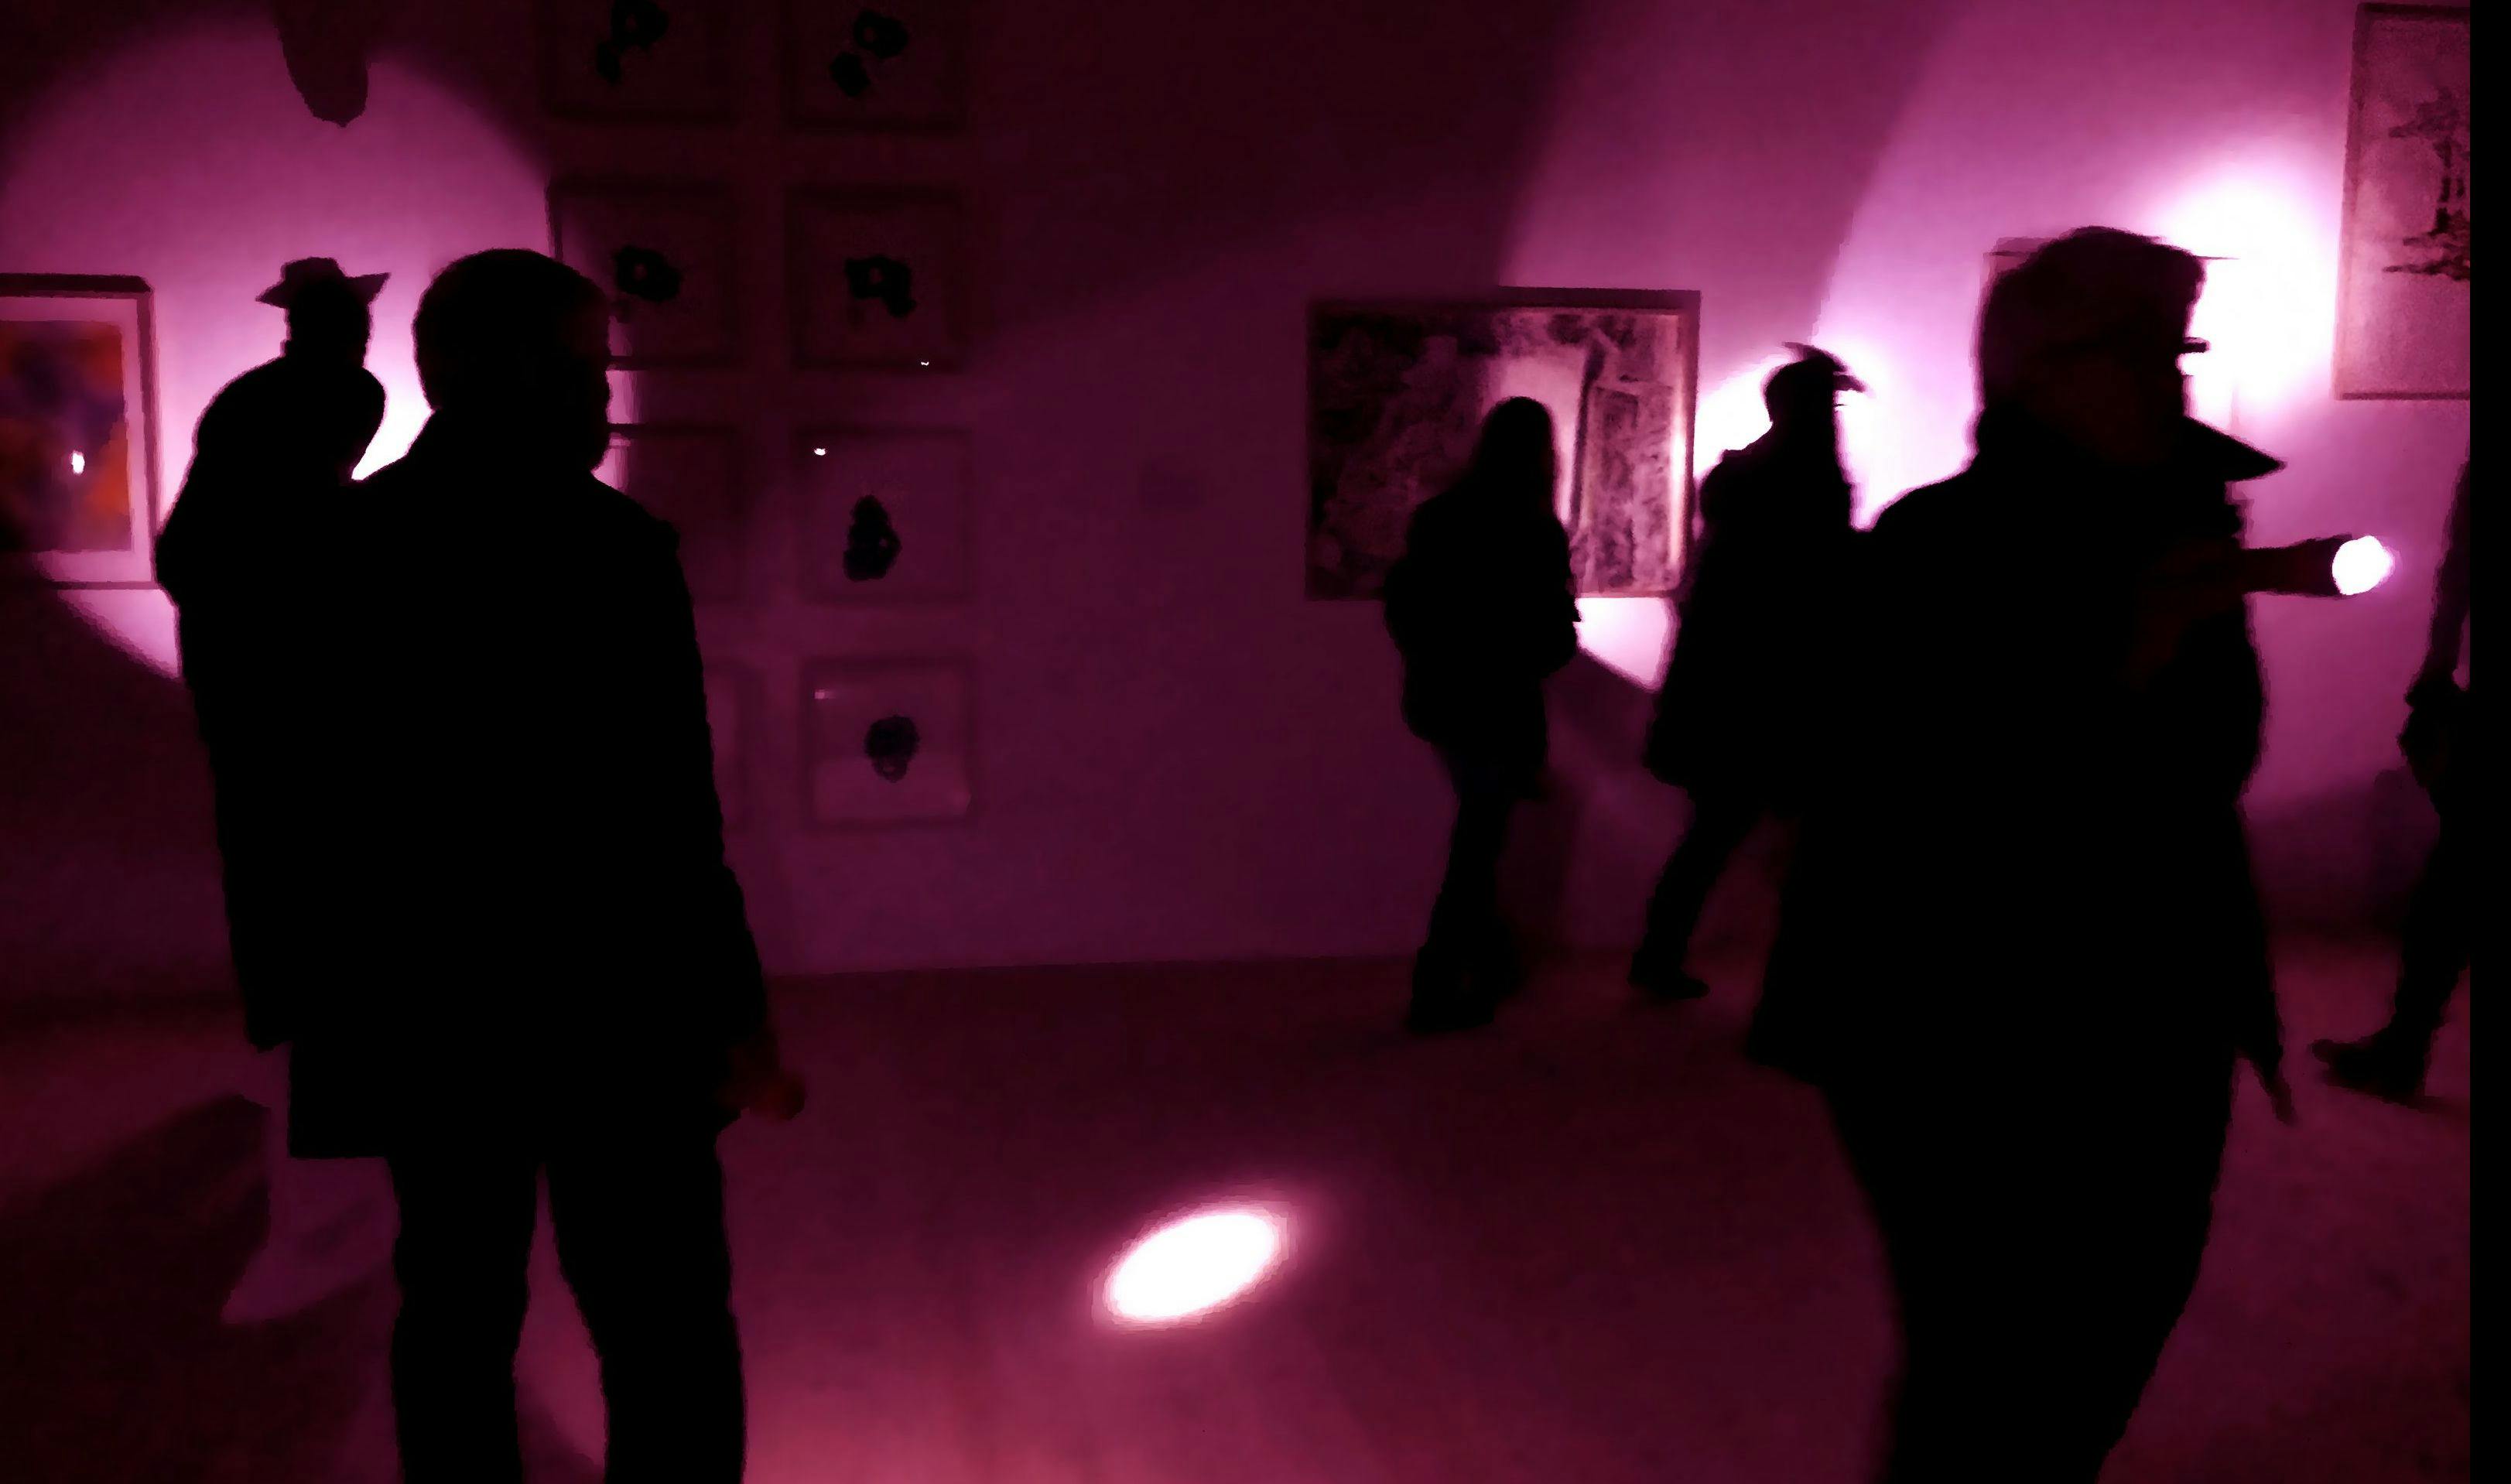 Dark image with silhouettes and paintings in the beam of flashlights